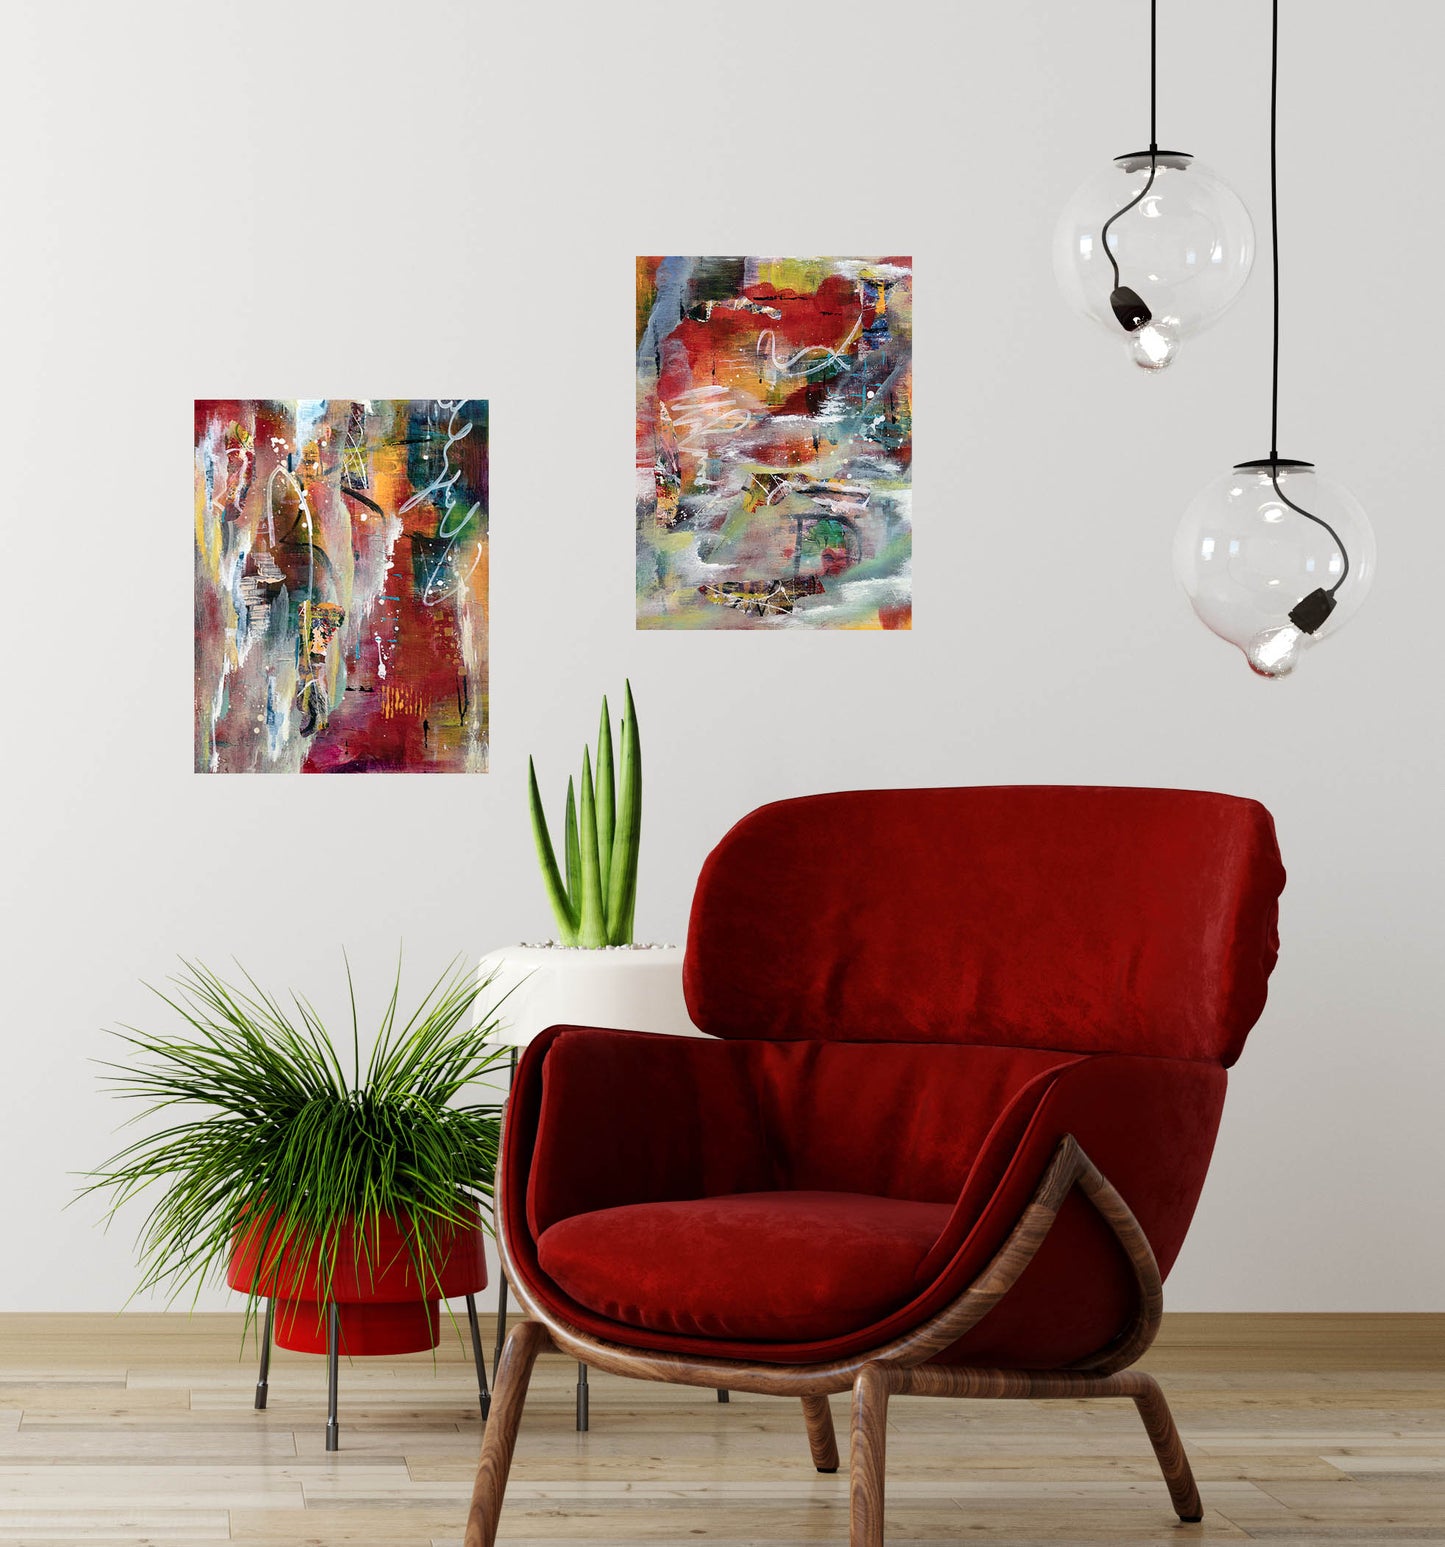 Red Hots #3 - Four Pieces - Sold in Sets of 2 (24x24 Gallery Wrapped Canvas)